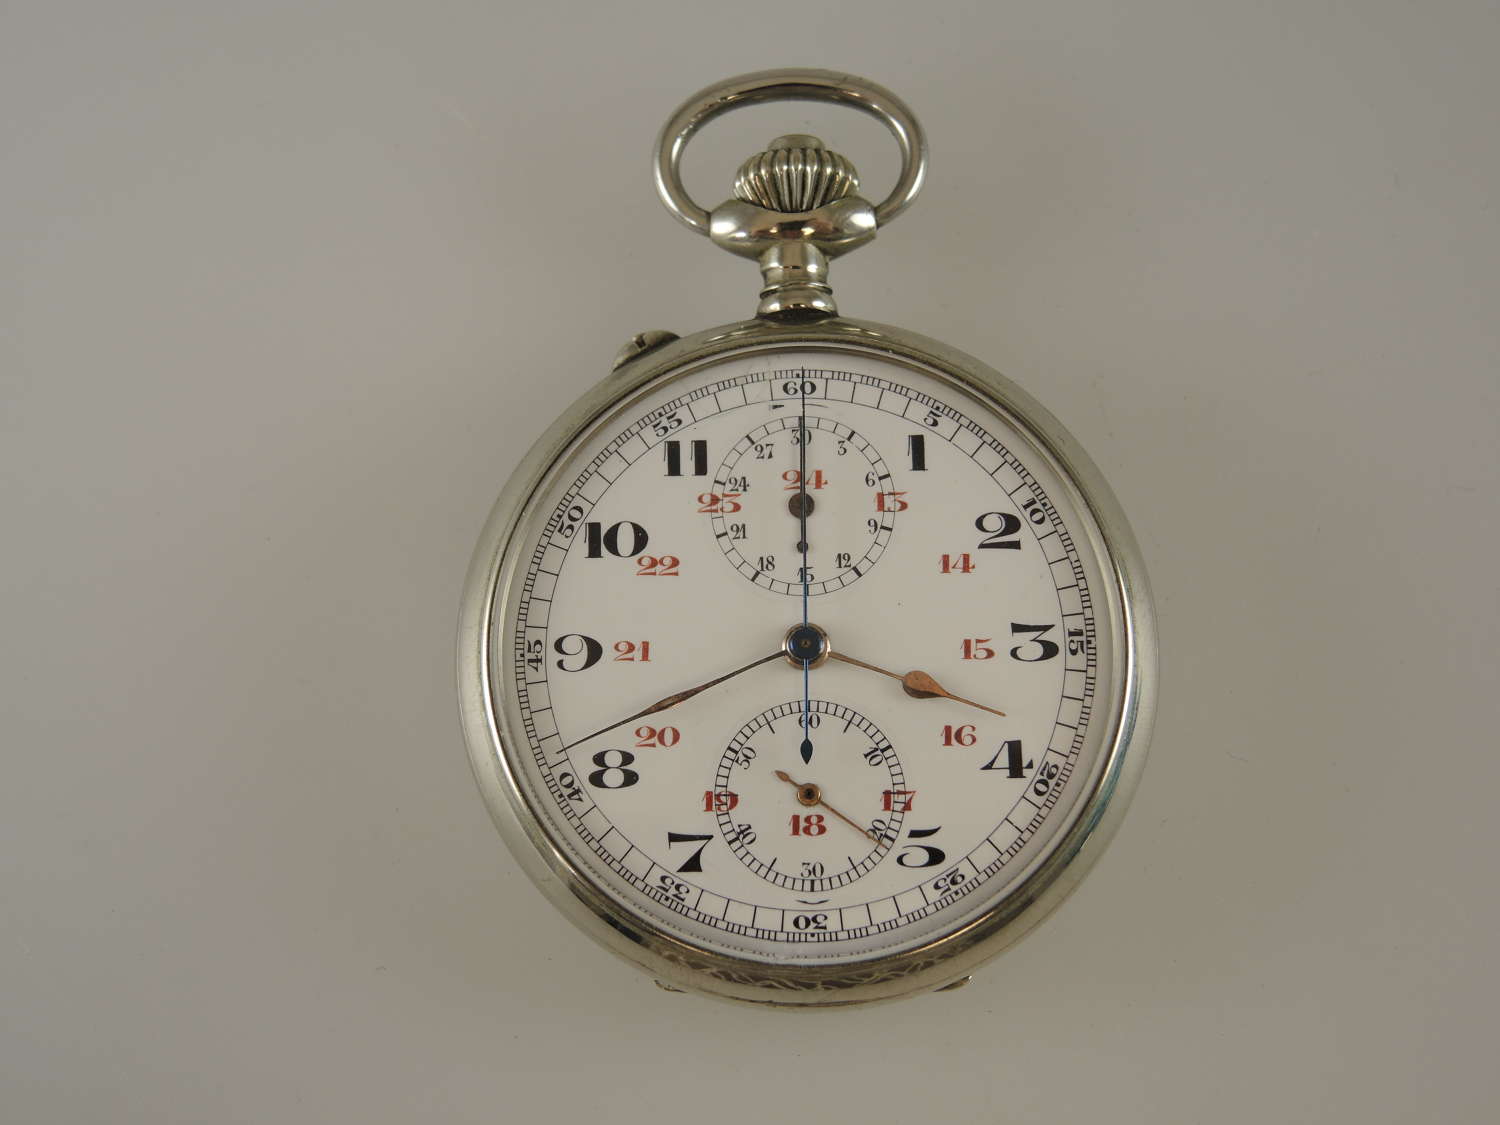 Vintage pocket watch with a chronograph function c1900